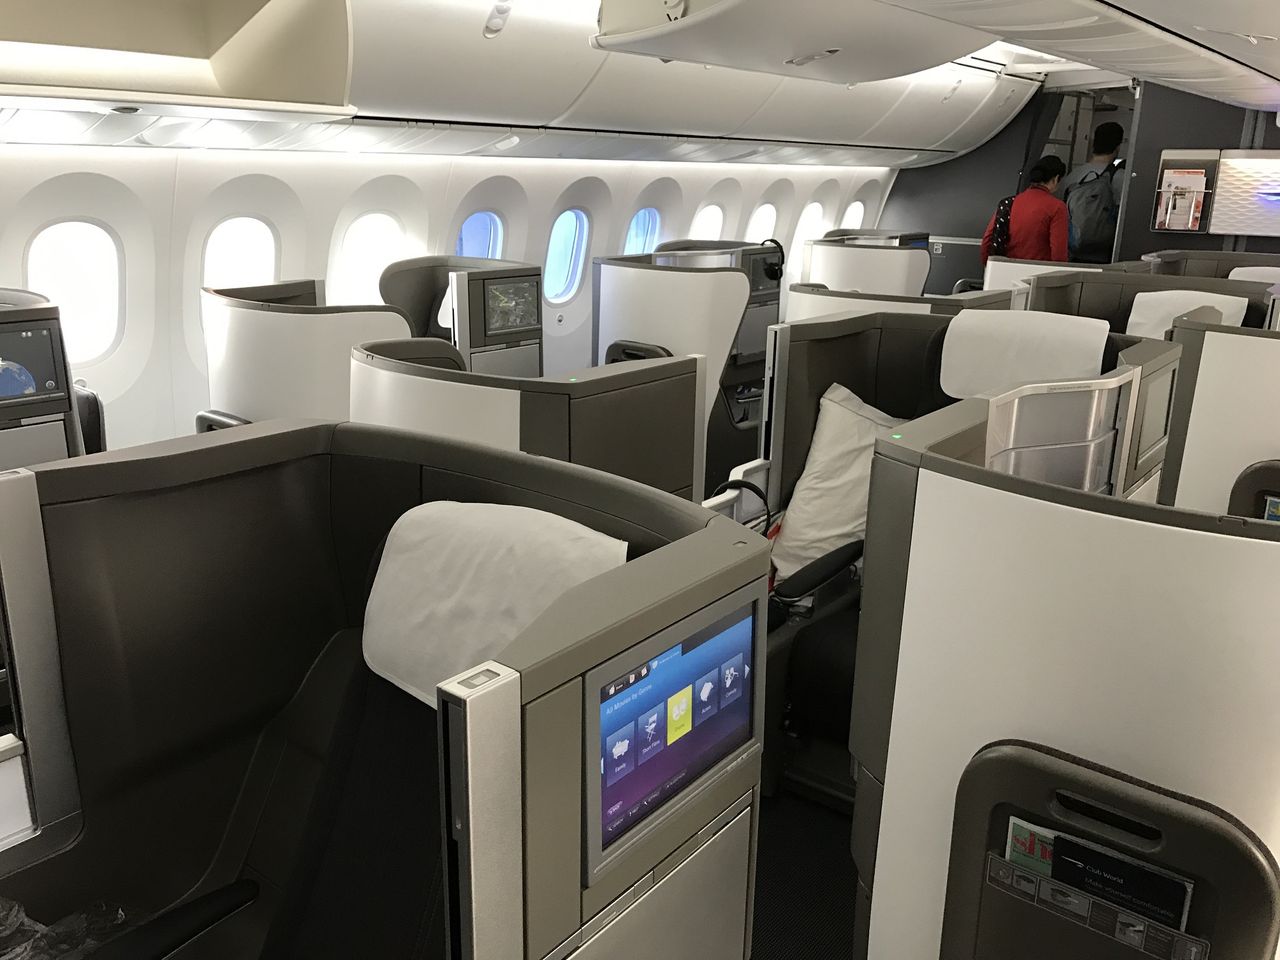 Review of British Airways flight from London to New Delhi in Economy